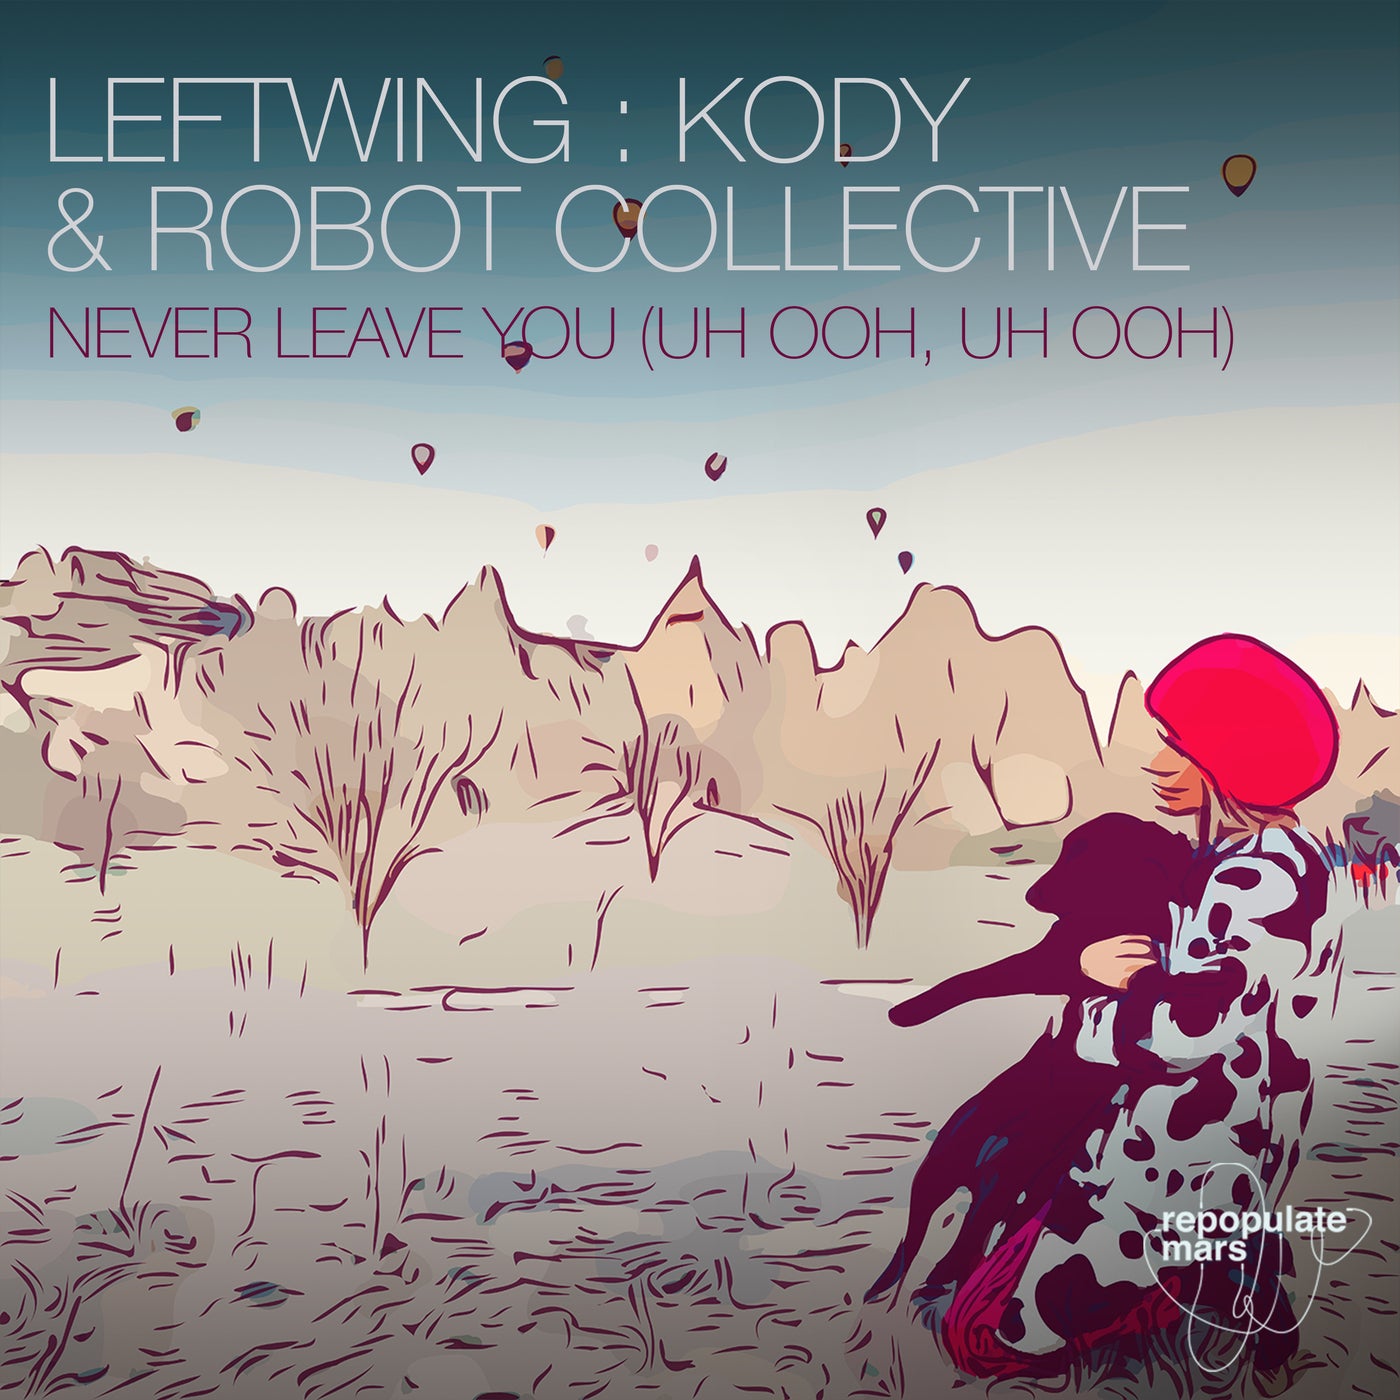 Leftwing:Kody, Robot Collective - Never Leave You (Uh Ooh, Uh Ooh) (Original Mix)